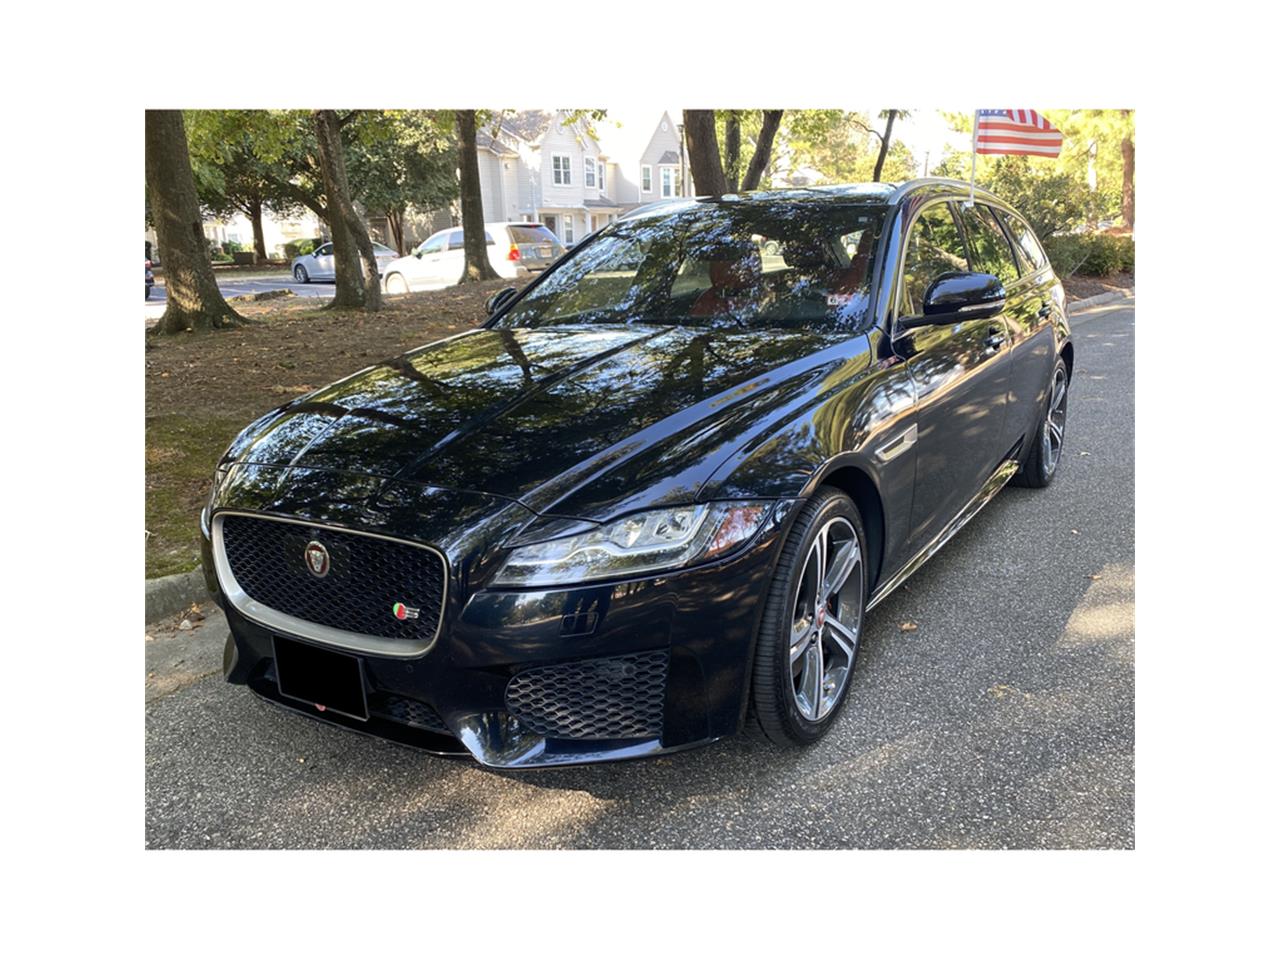 For Sale at Auction: 2018 Jaguar XF in Greensboro, North Carolina for sale in Greensboro, NC